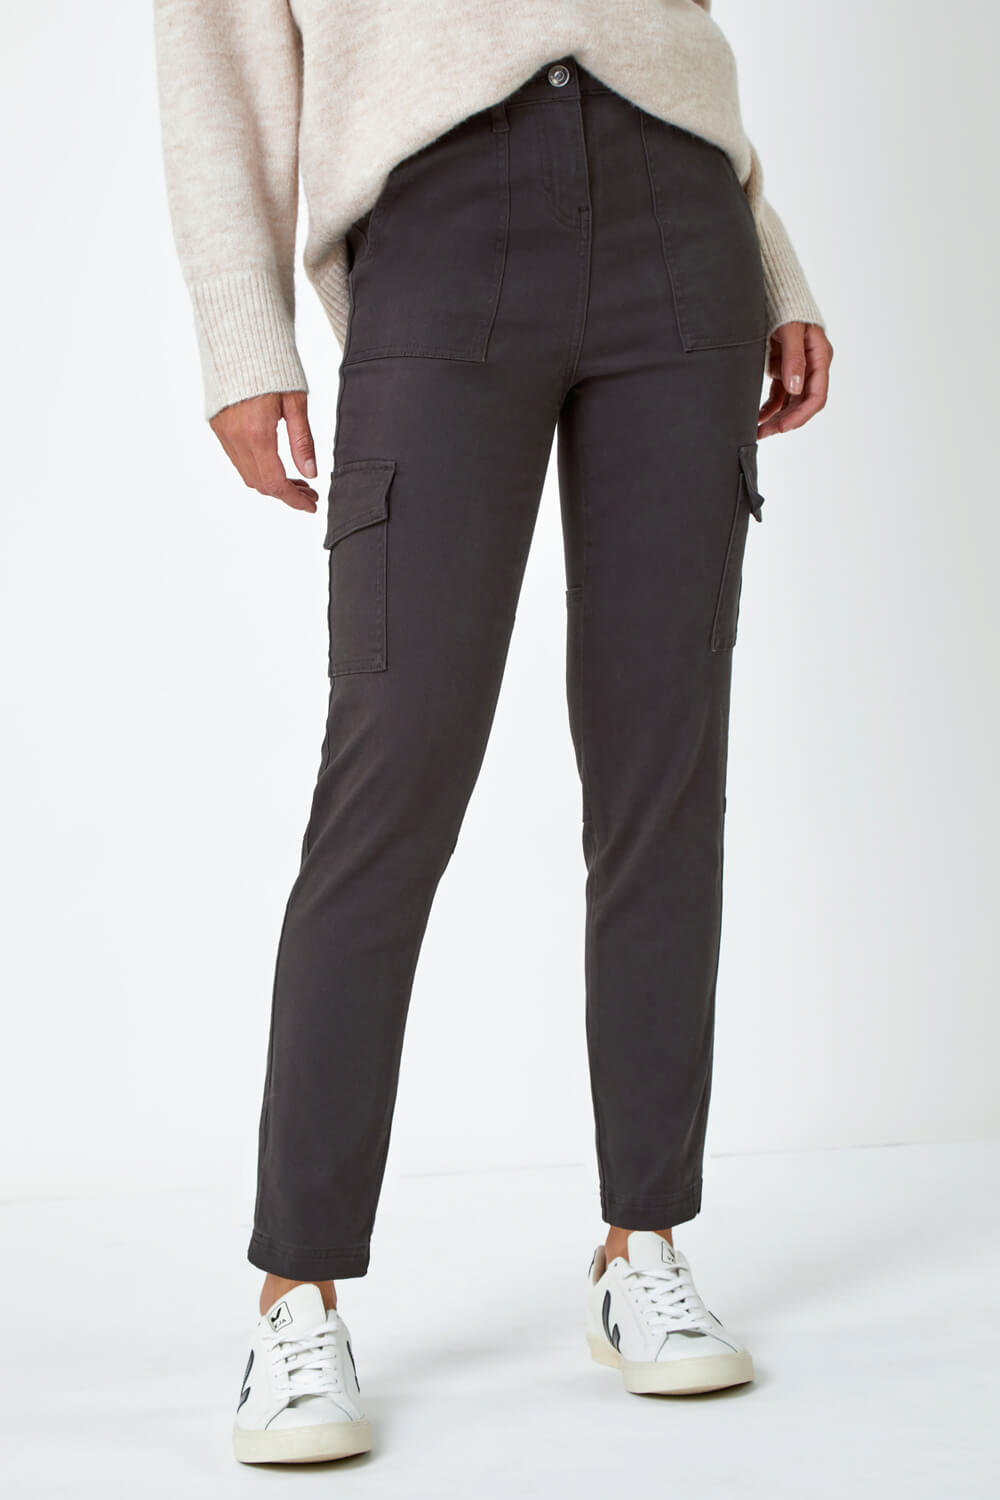 Charcoal Cotton Blend Cargo Stretch Jegging, Image 4 of 5